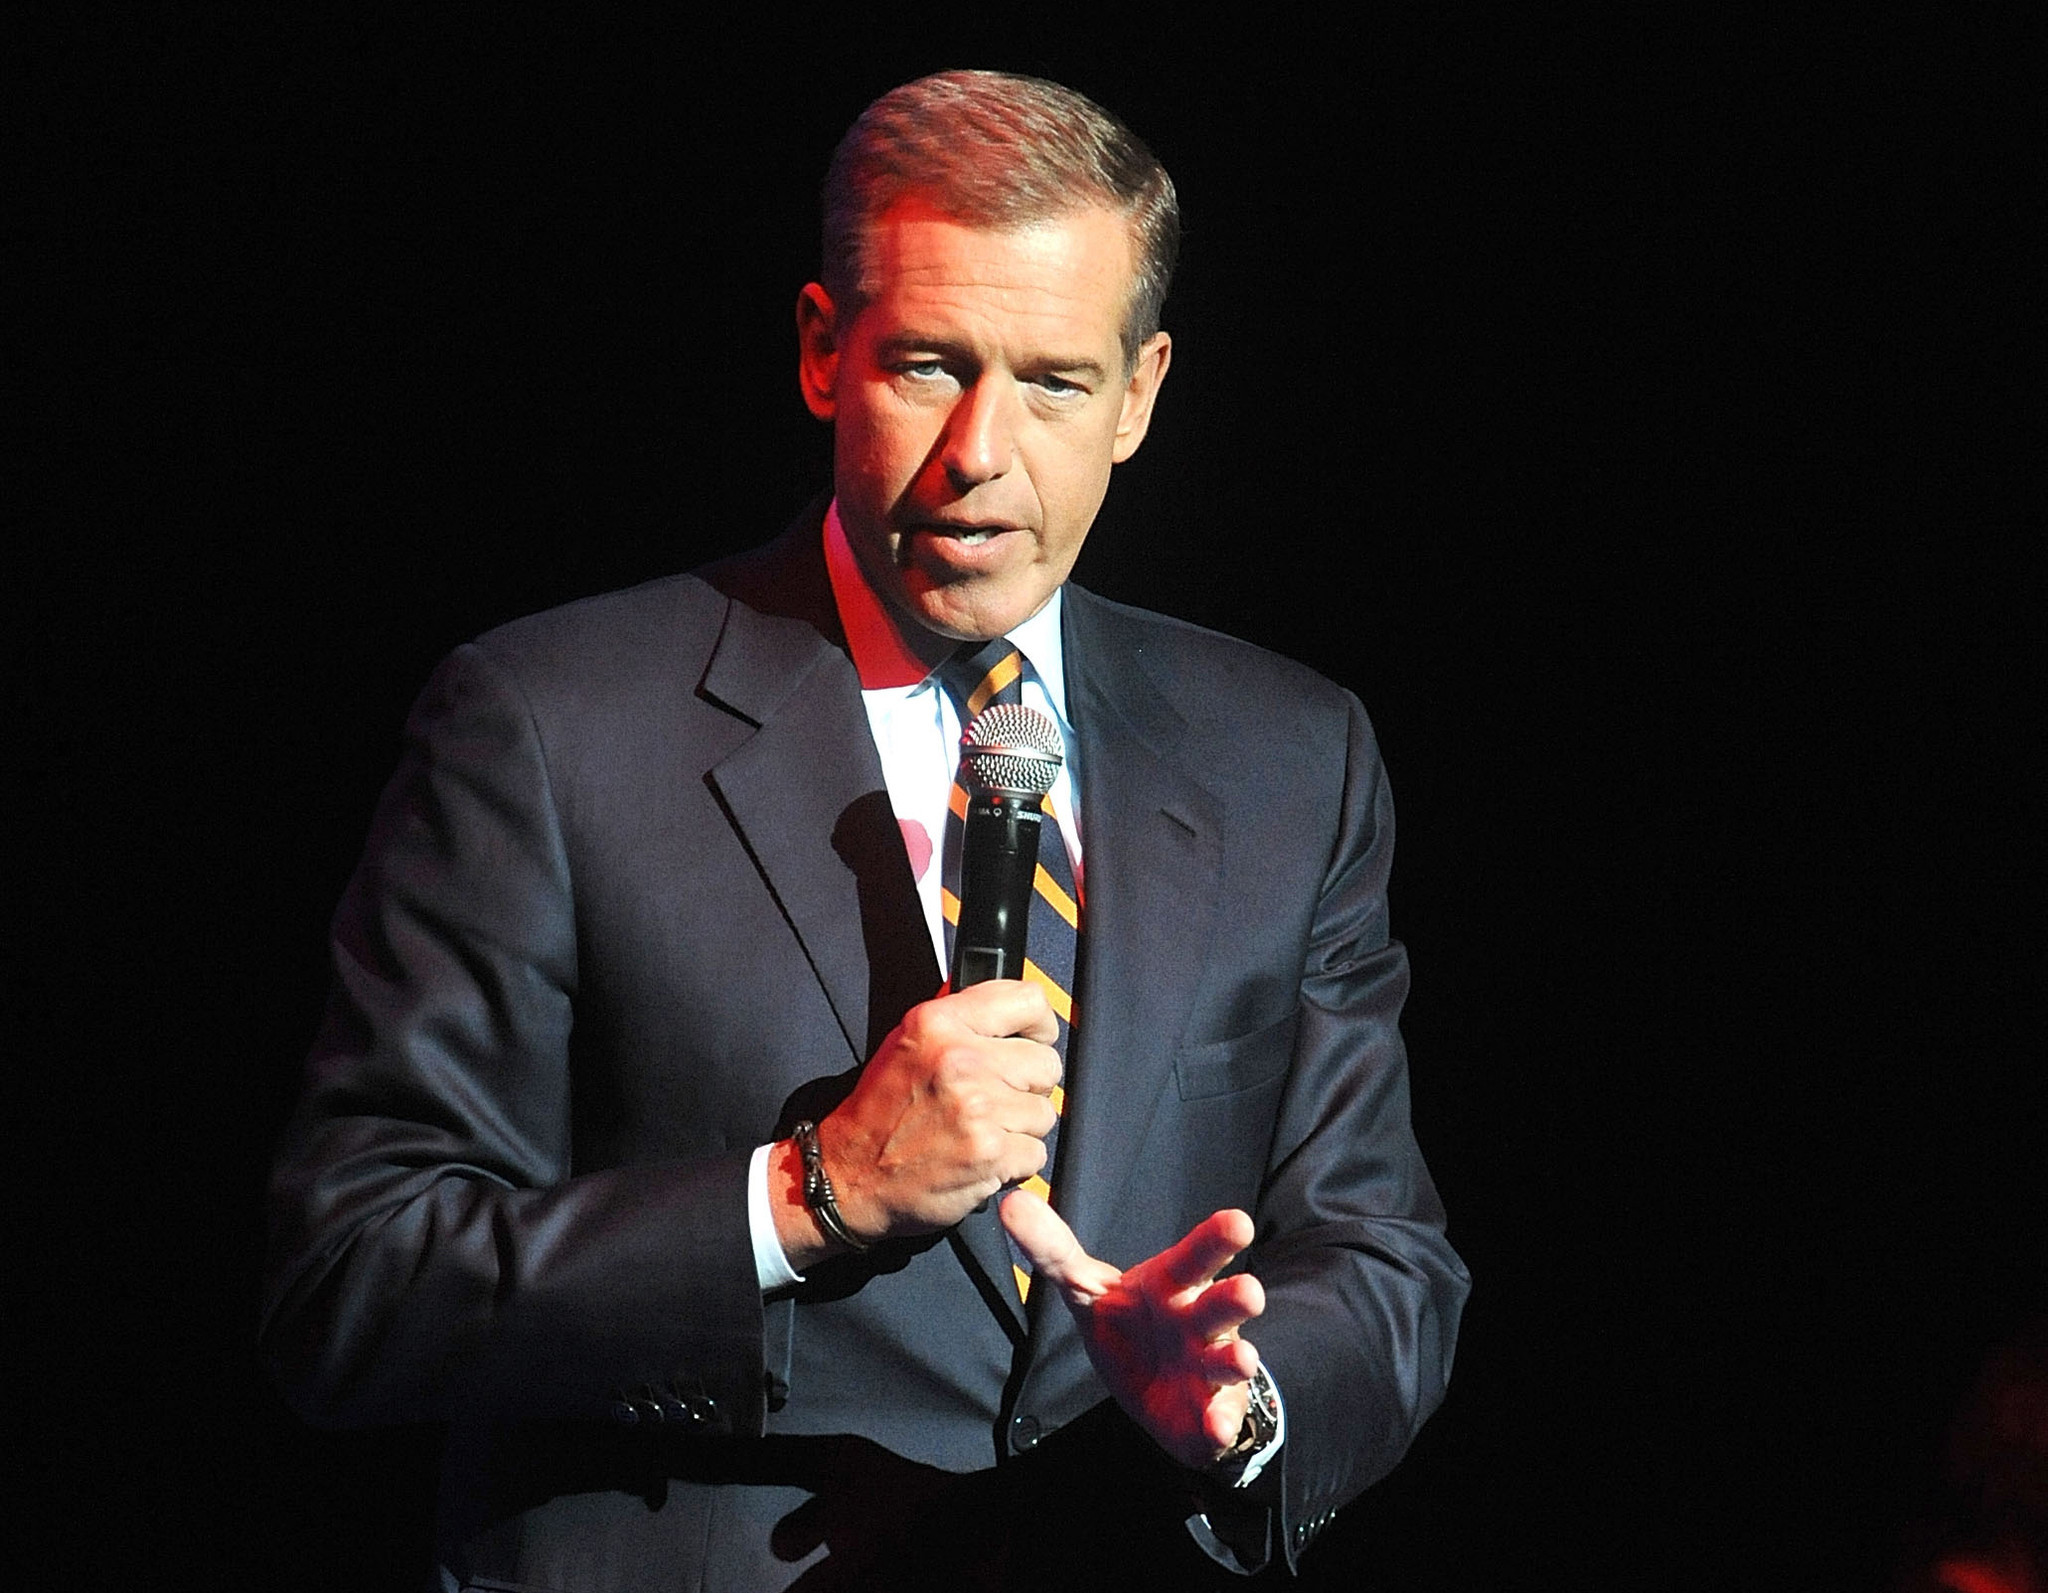 Prospect of Brian Williams returning to 'NBC Nightly News' is fading